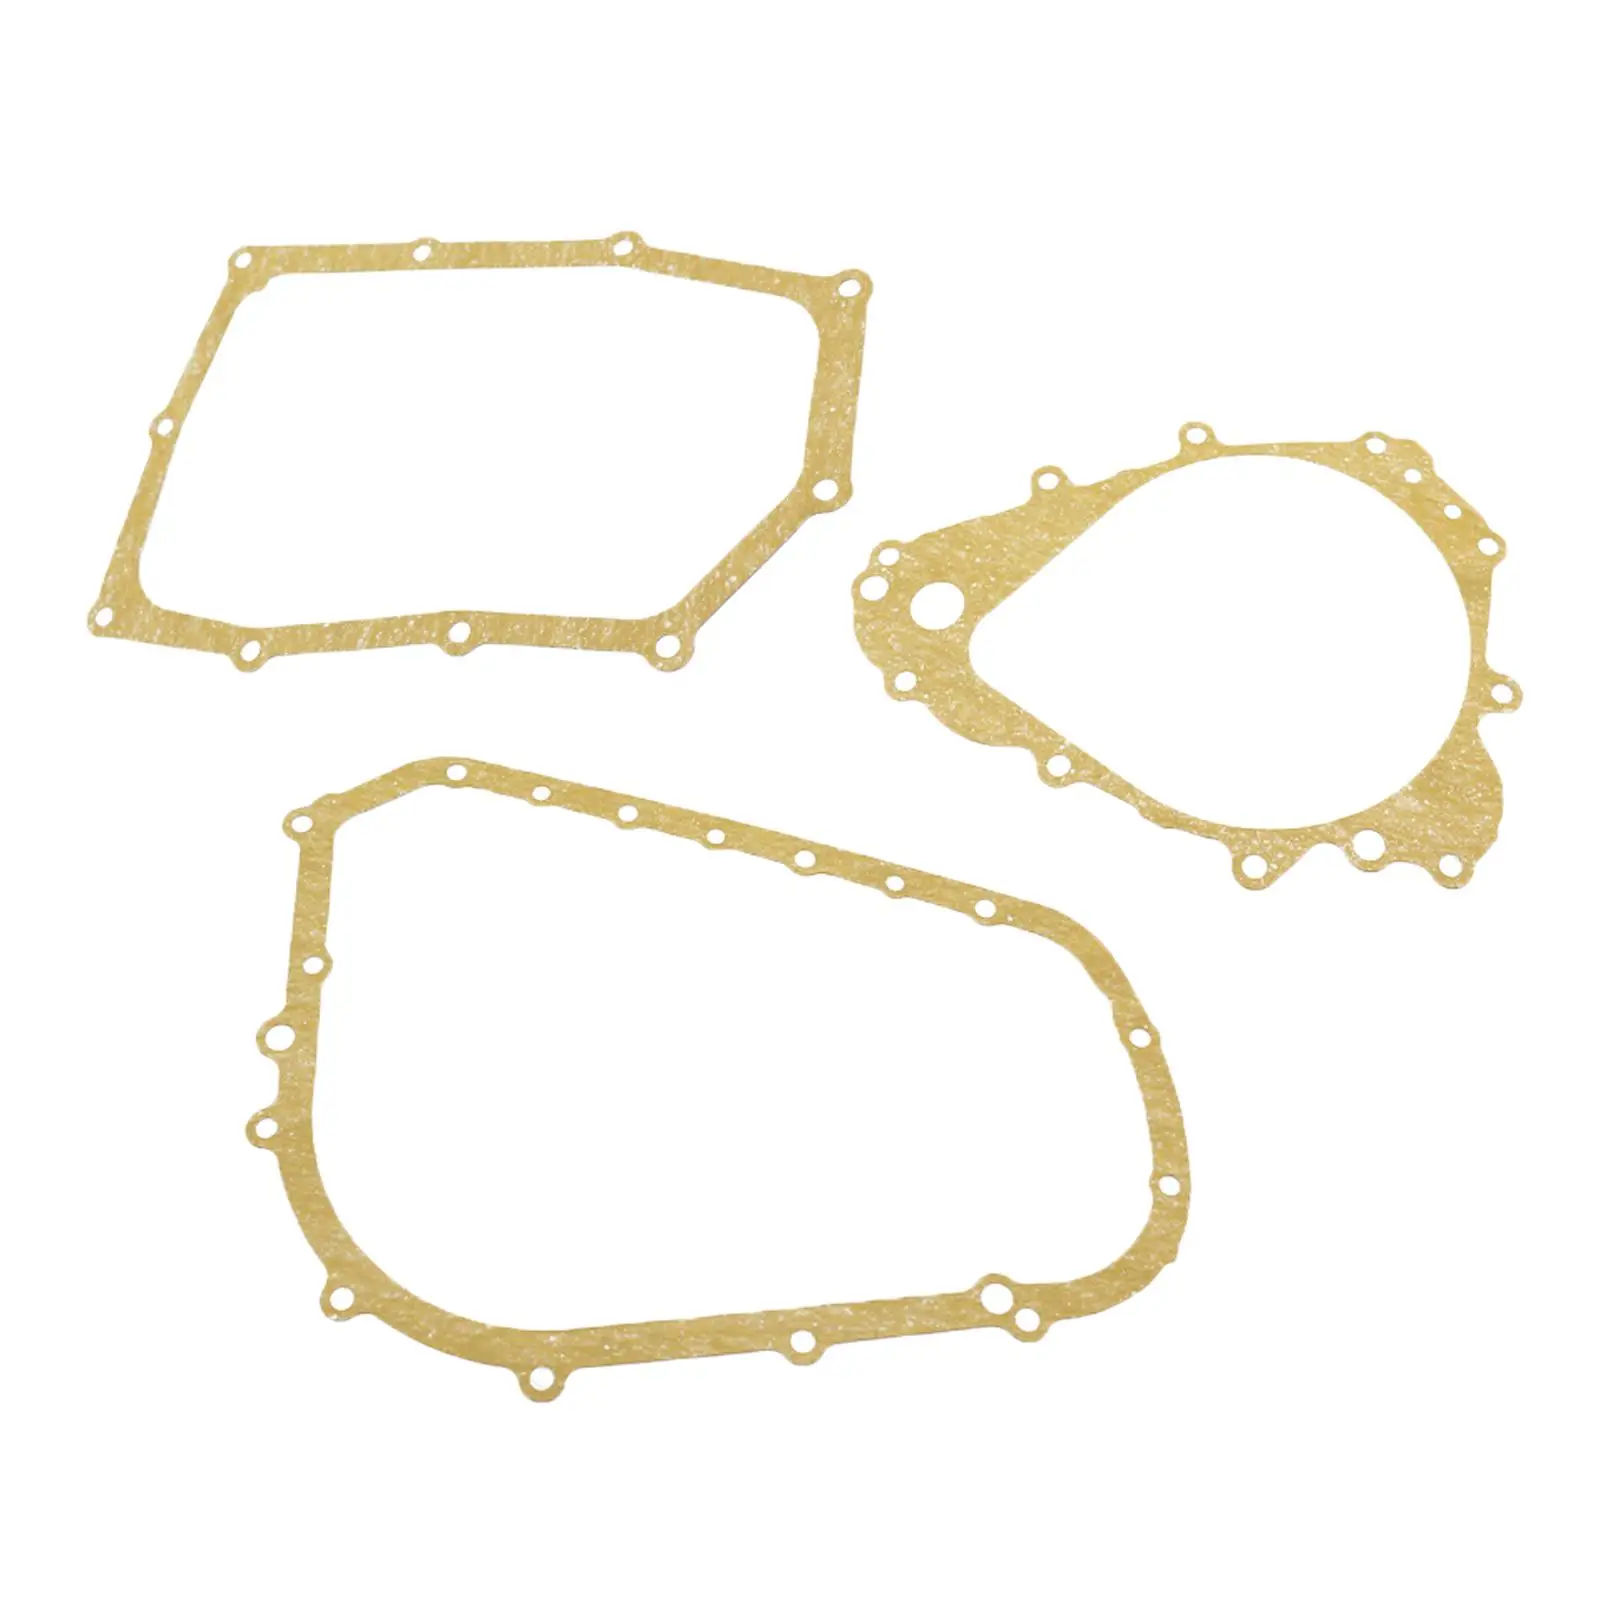 Oil Pan Clutch  Cover Gasket, Direct Replaces, Spare Parts, for    2012-2018, Durable ,Accessories